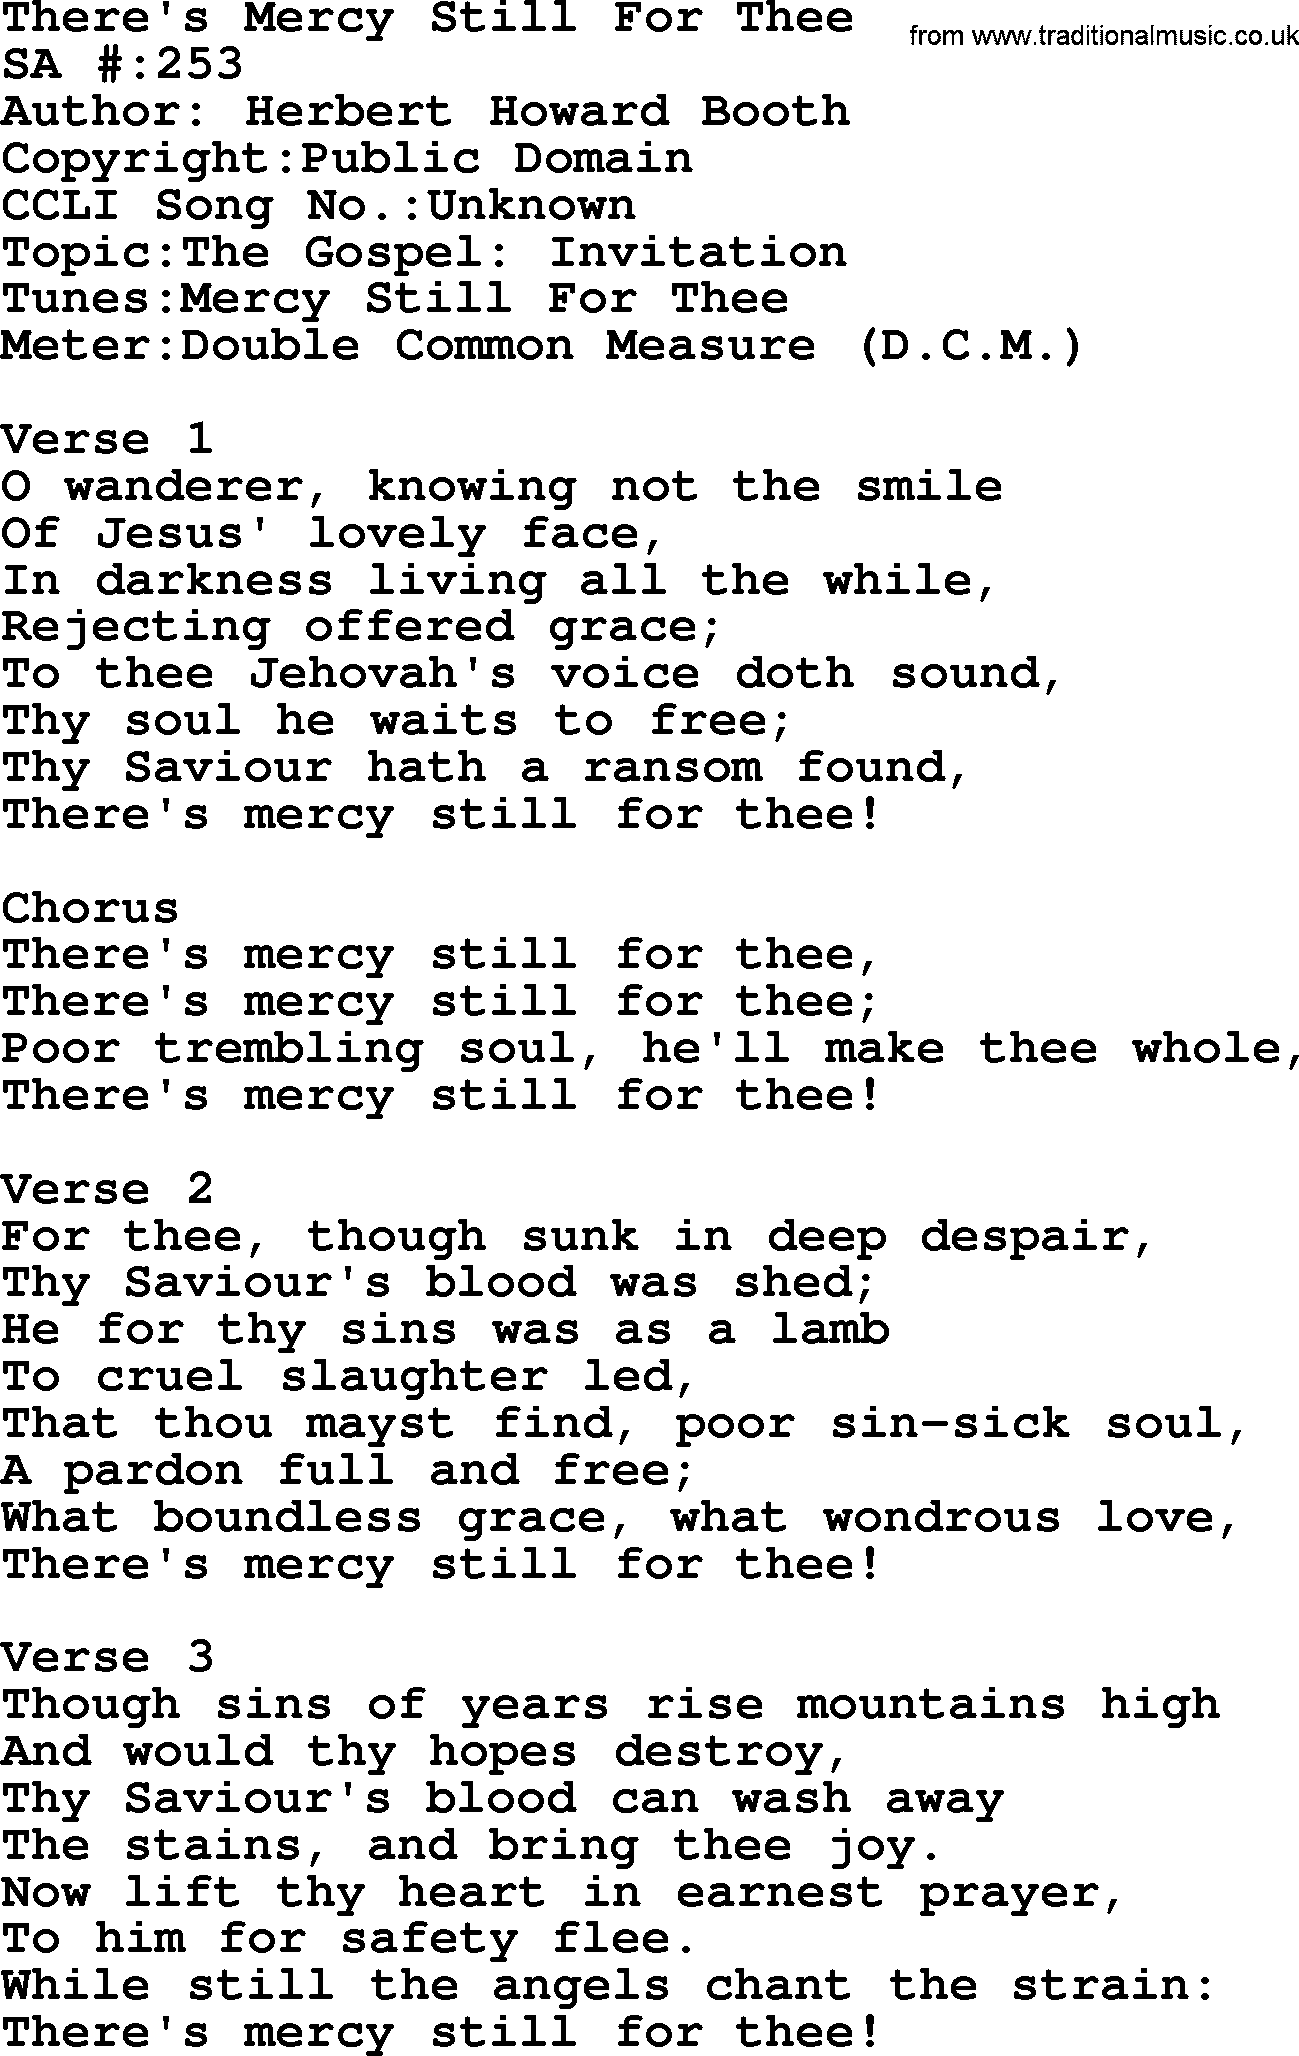 Salvation Army Hymnal, title: There's Mercy Still For Thee, with lyrics and PDF,